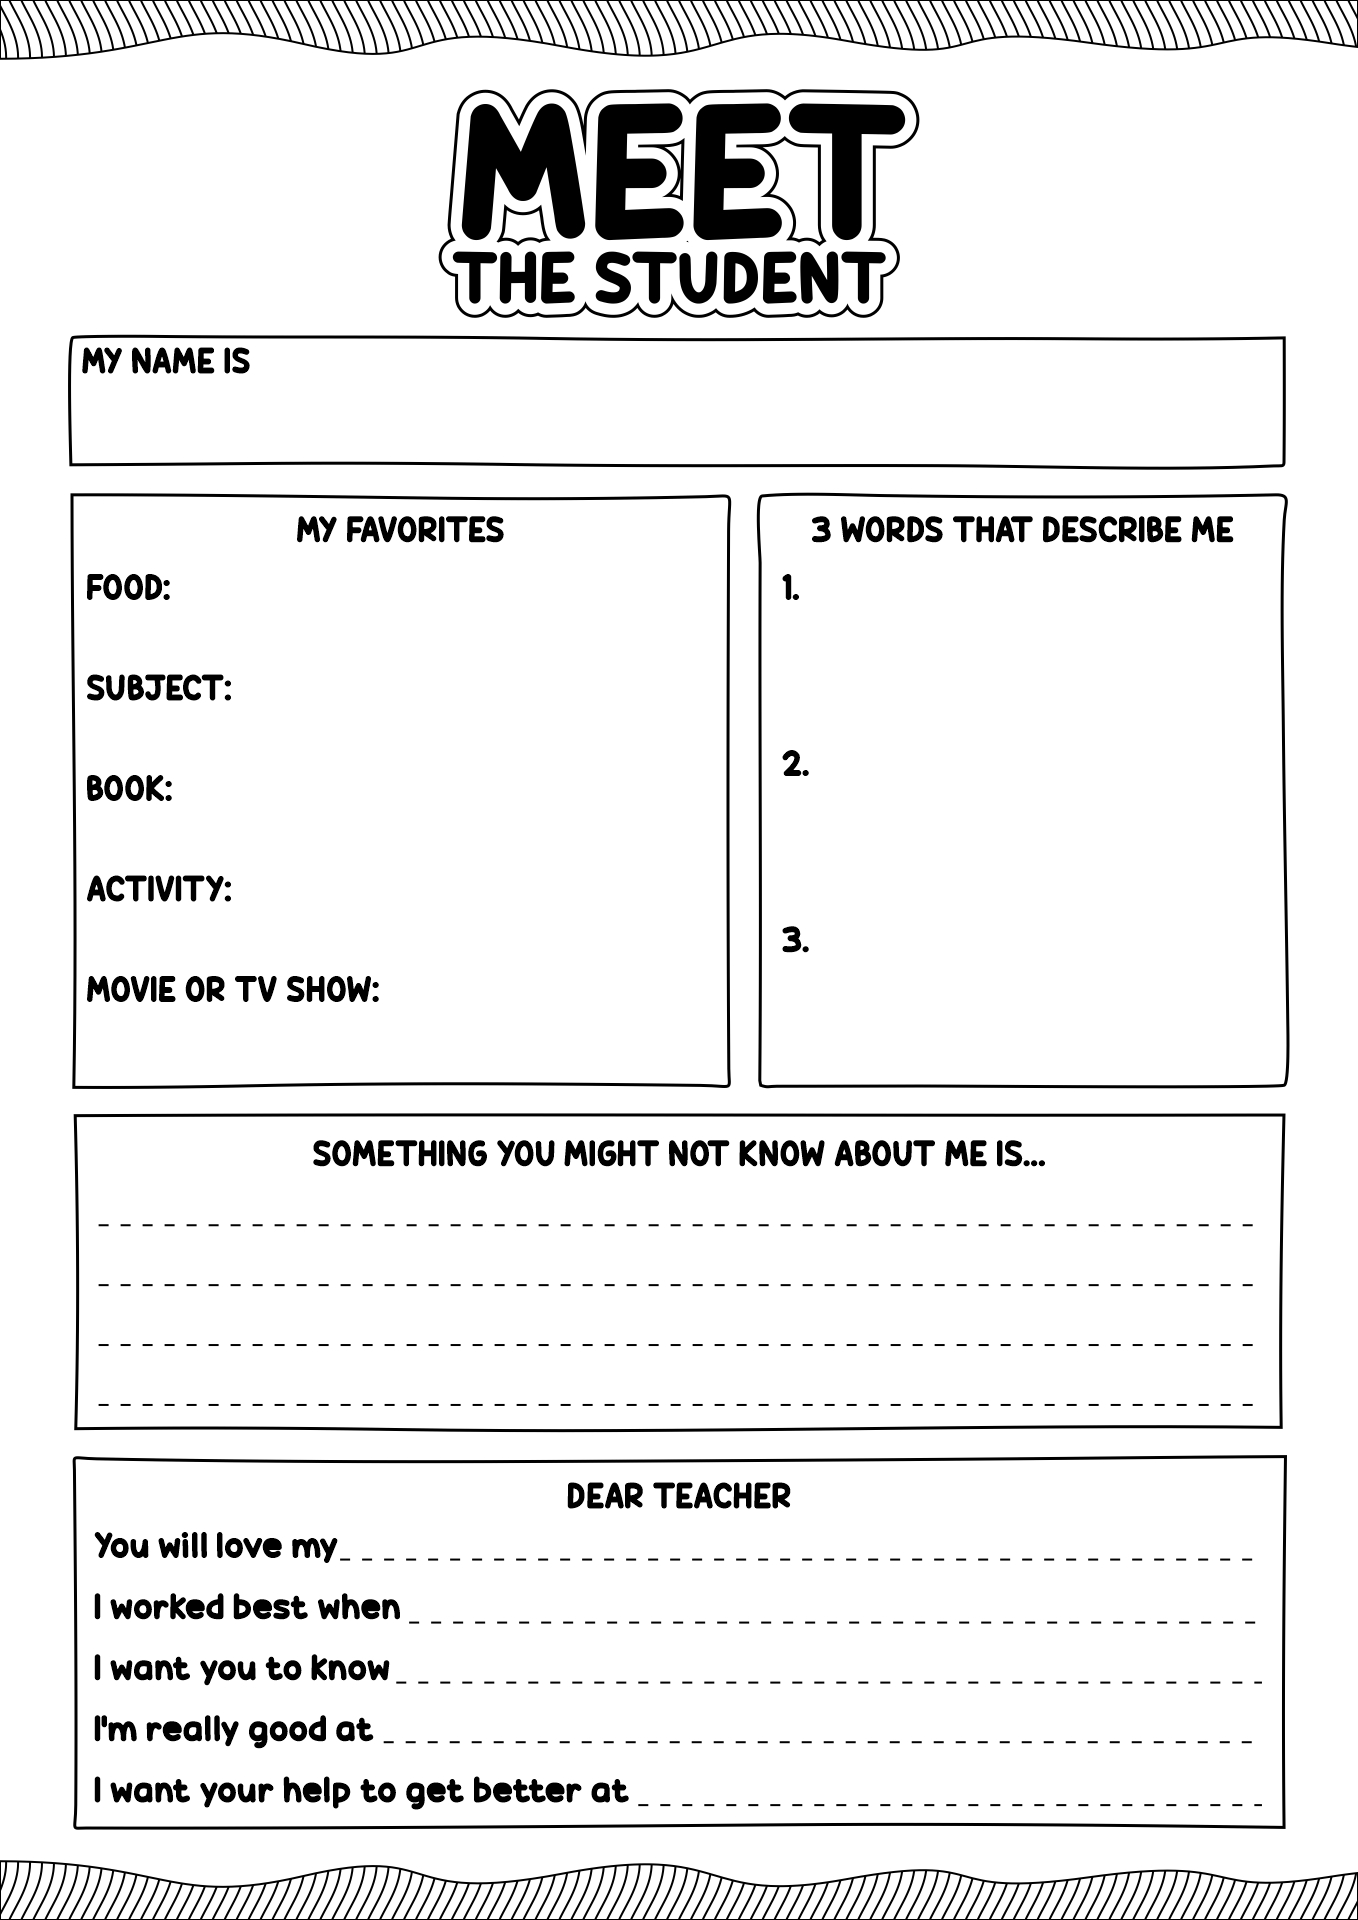 Student Getting to Know You Worksheet Image